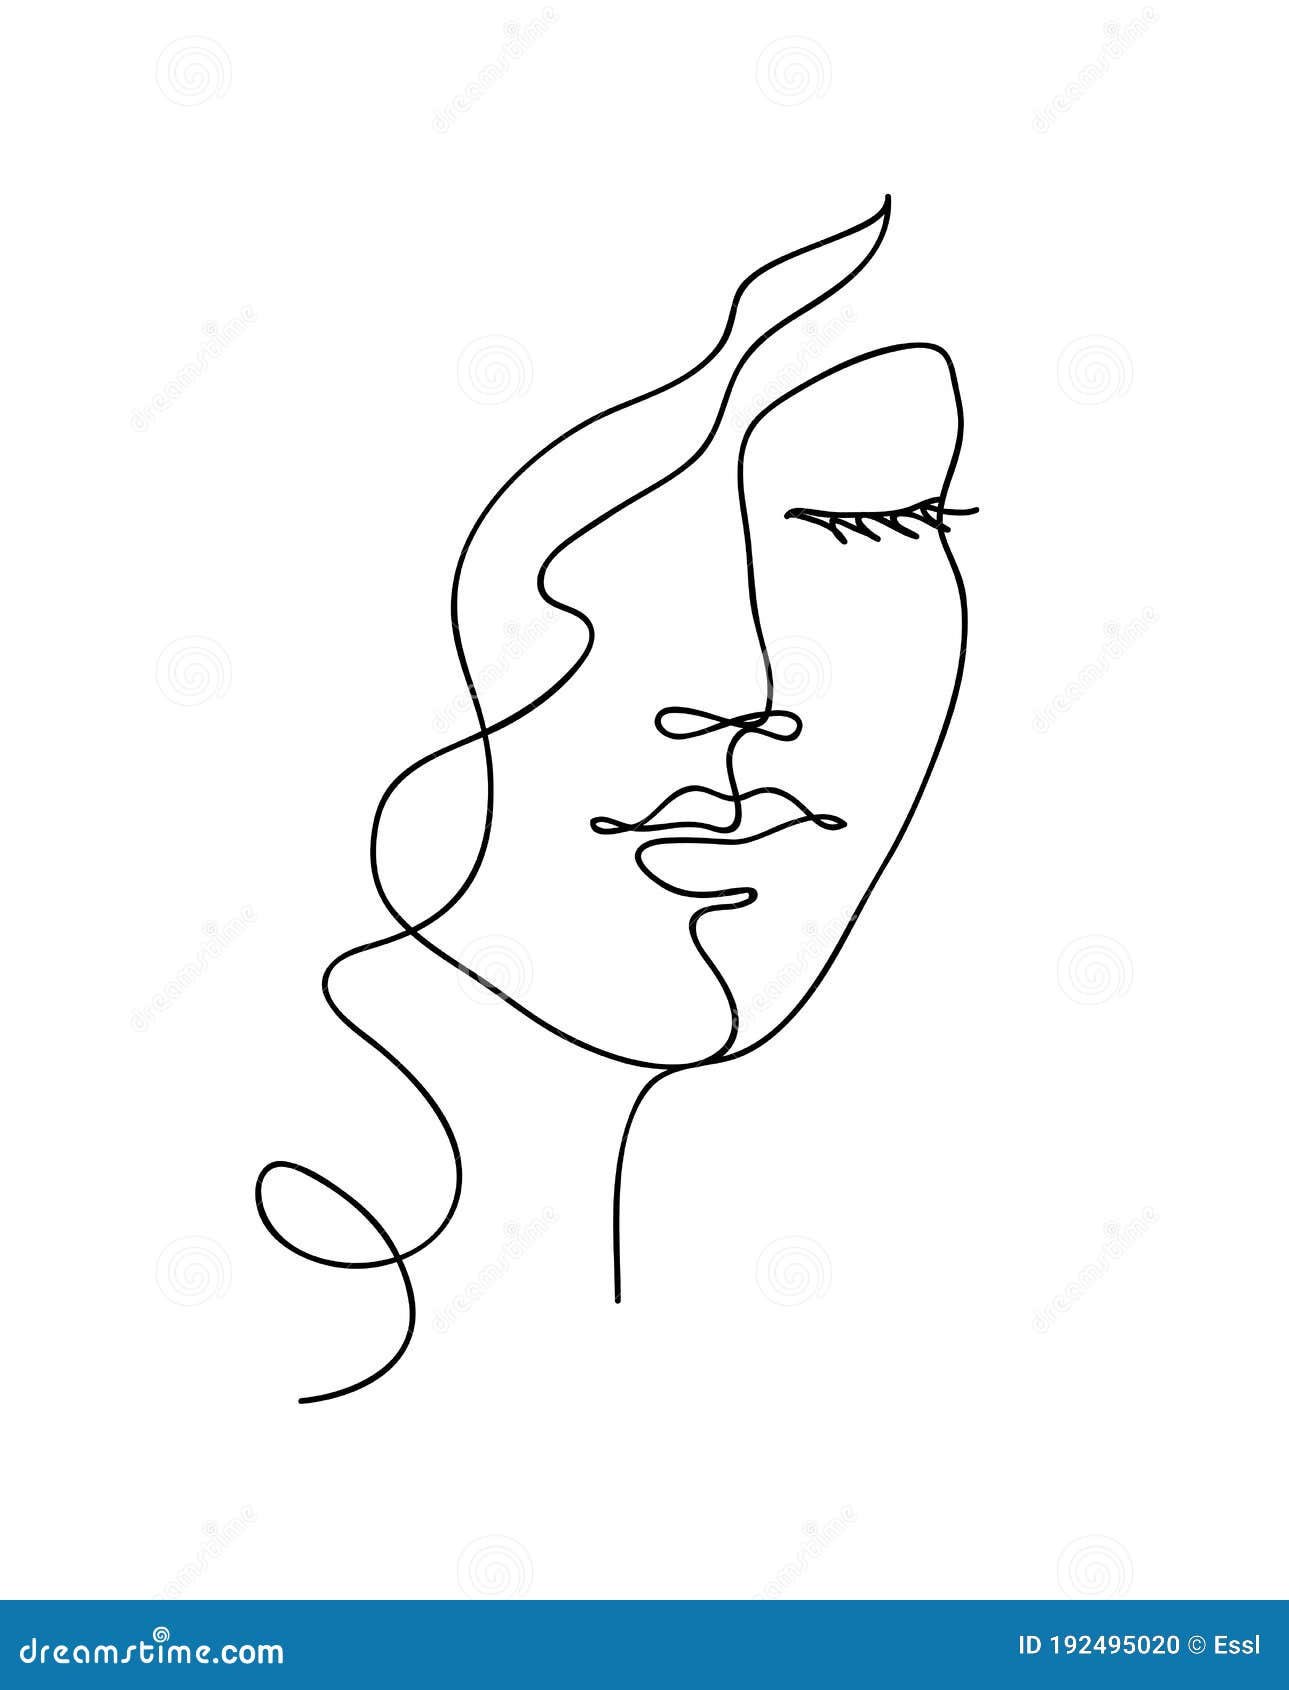 Abstract Woman Face With Wavy Hair. Black And White Hand